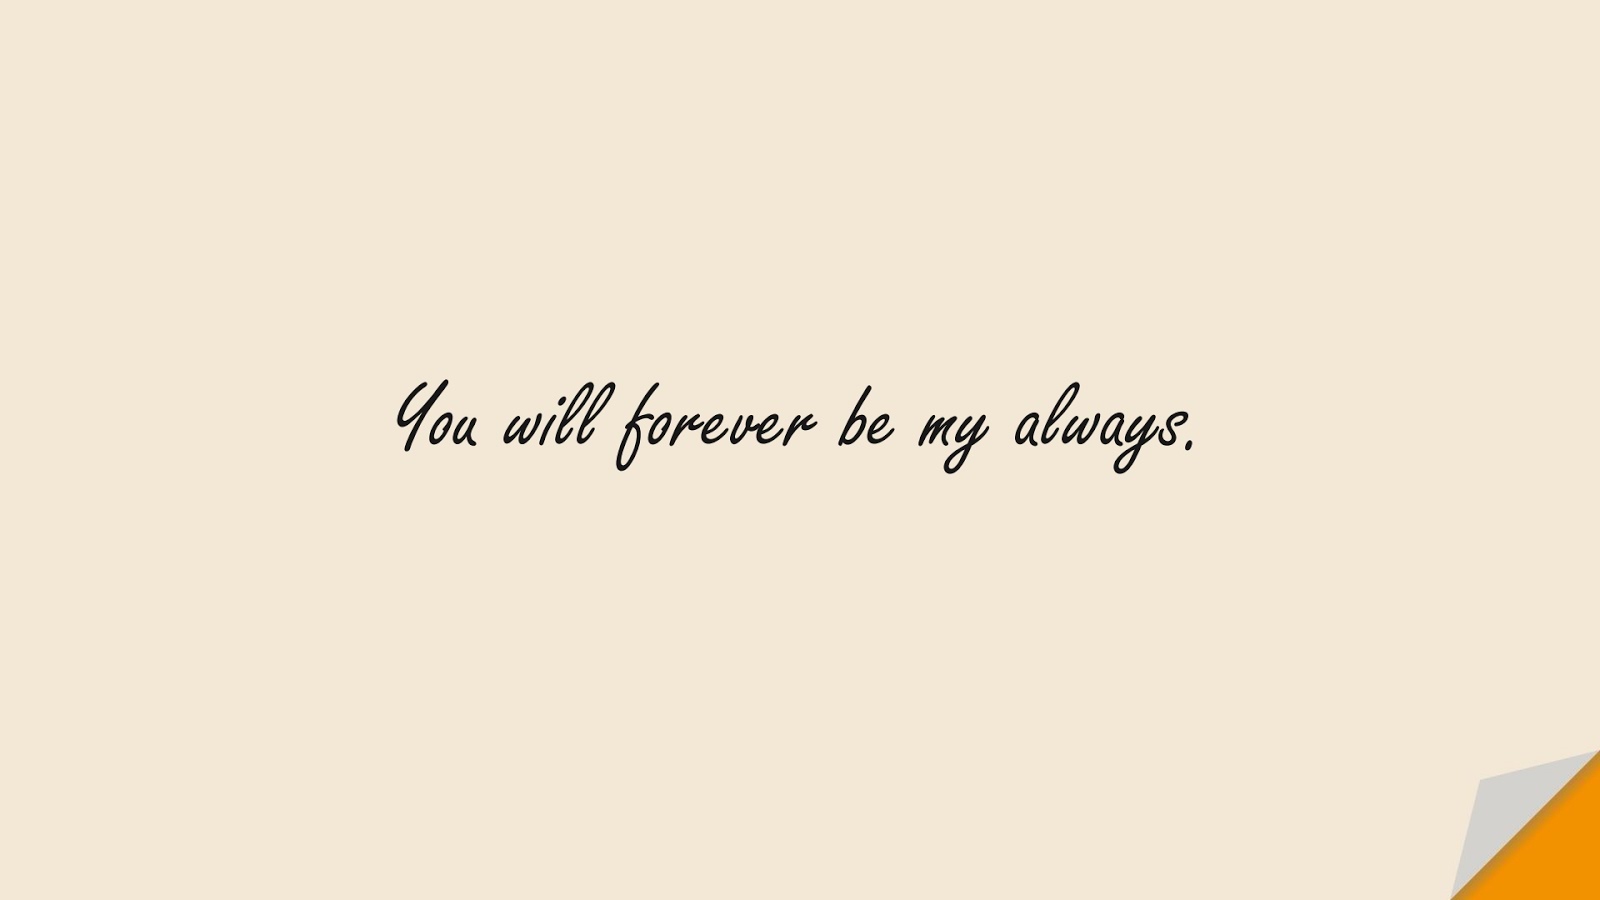 You will forever be my always.FALSE